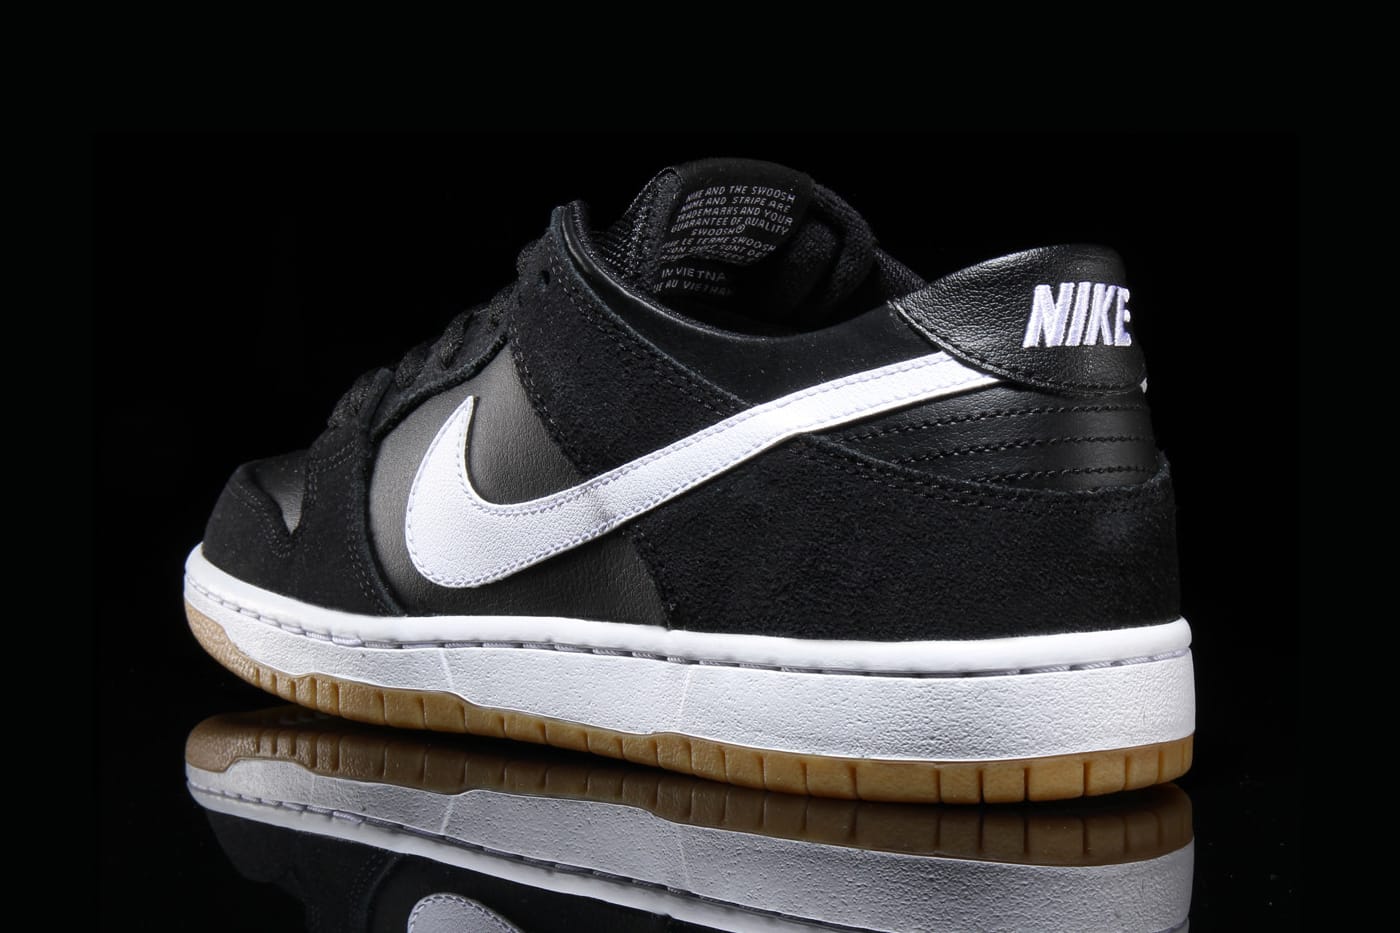 Nike SB Dunk Low Pro in Classic Black/White/Gum Colorway | Hypebeast